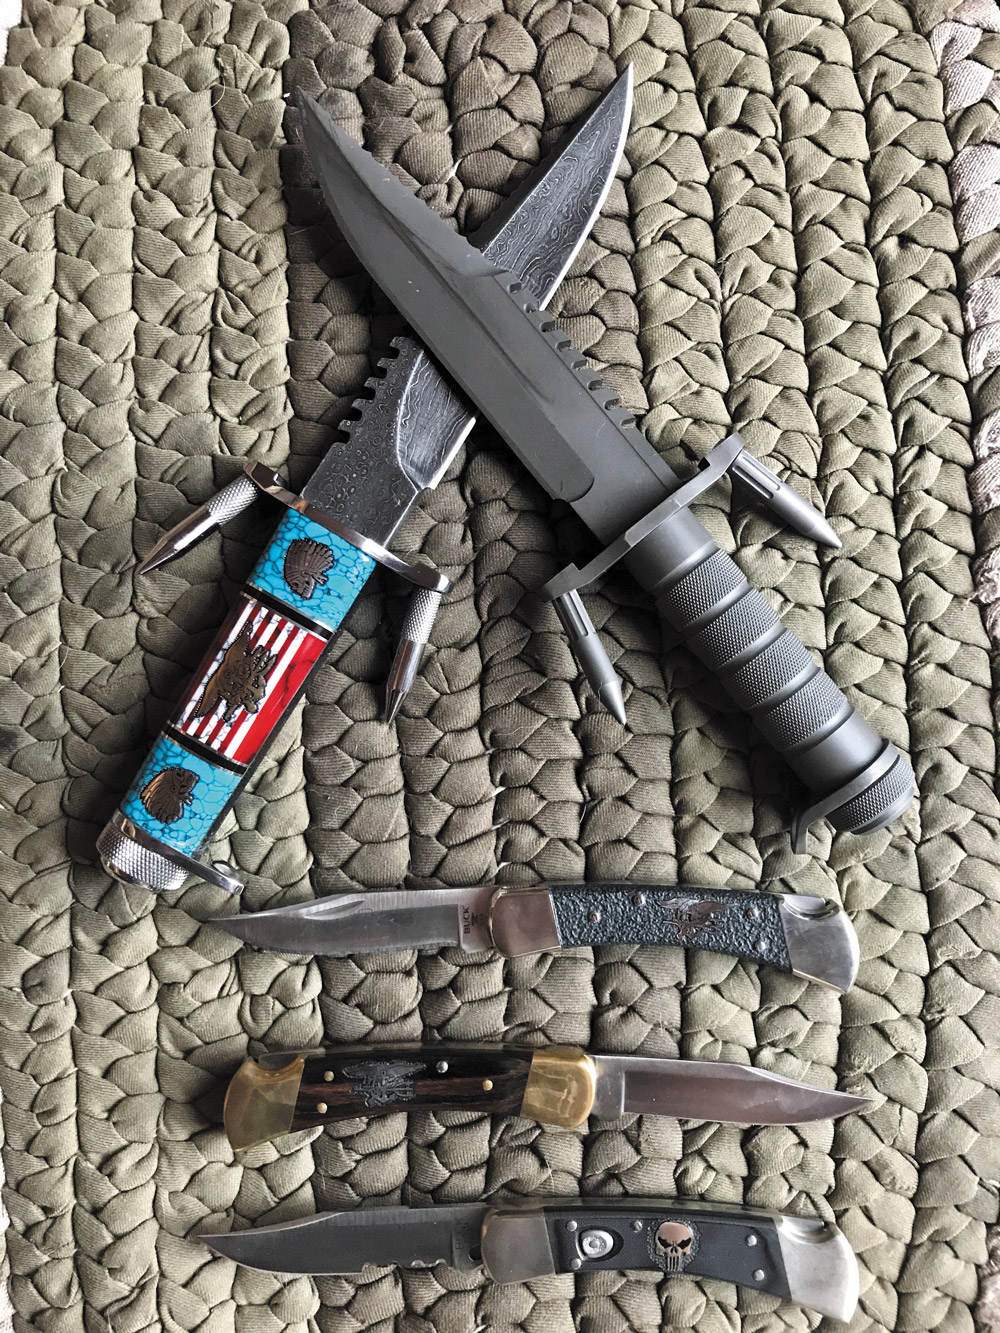 Top-left is the David Yellowhorse Damascus 184, top-right is the CMDR Coulter all-titanium 184. Below, David made two SEAL Trident 110s and a Punisher 110 auto.